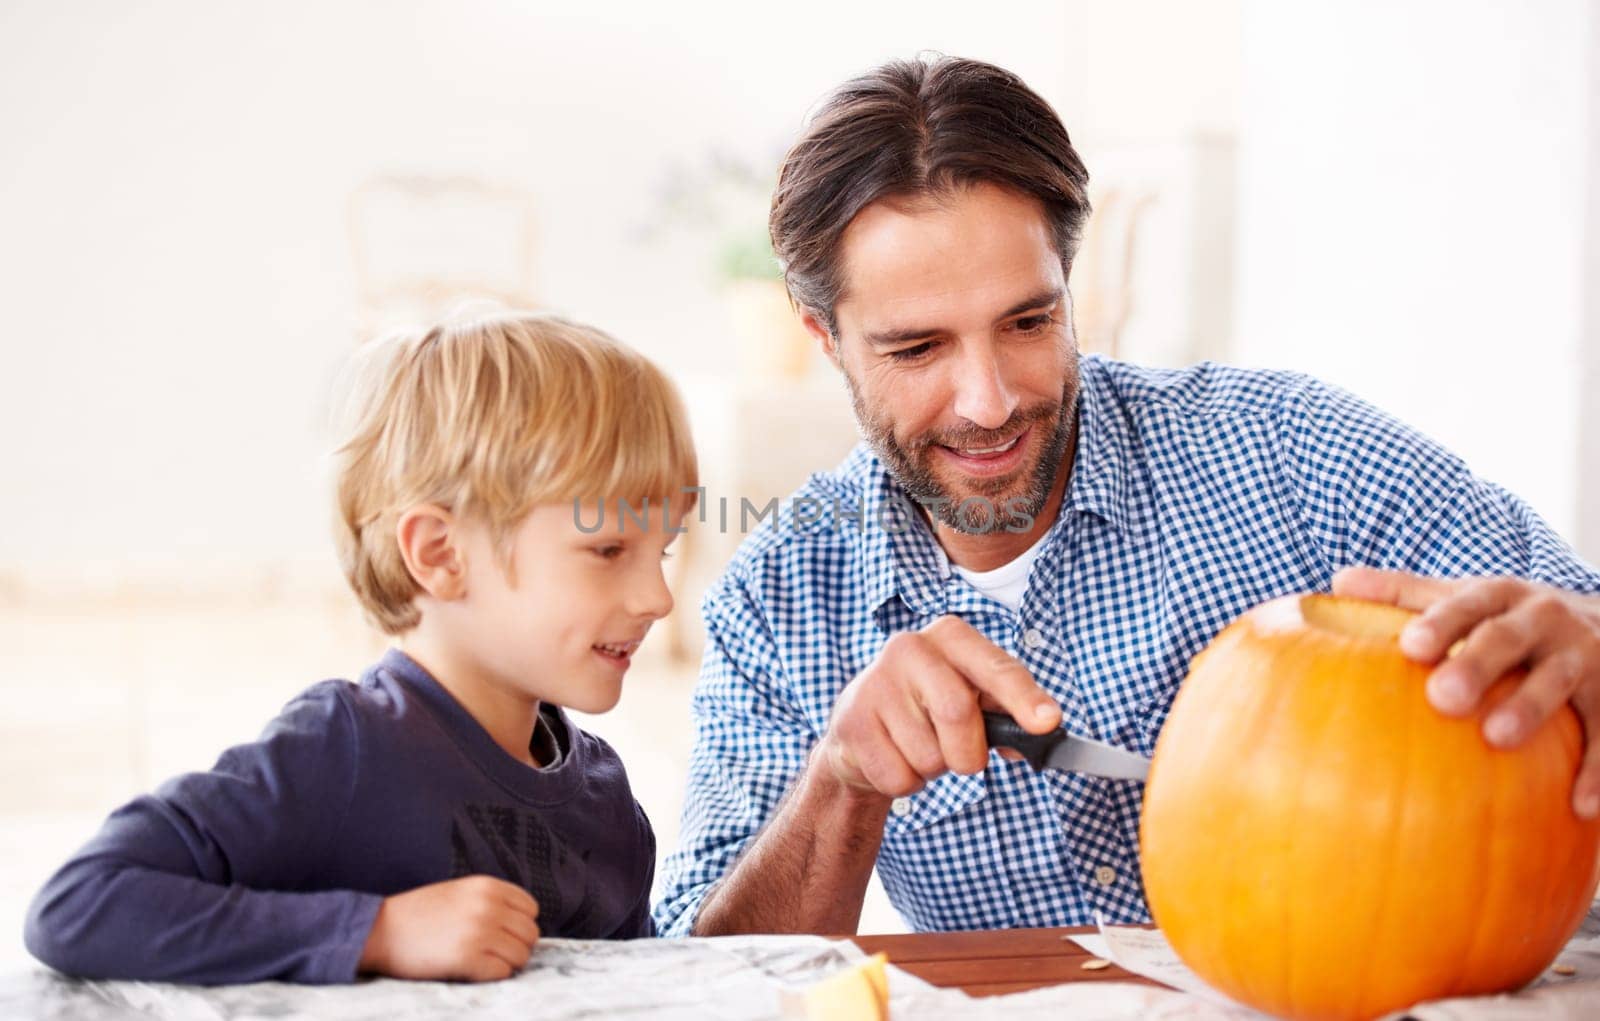 Father, child and carving pumpkin with knife to celebrate halloween, fun craft and creativity at home. Happy boy kid, dad and family cutting orange vegetable for holiday lantern, party and decoration.